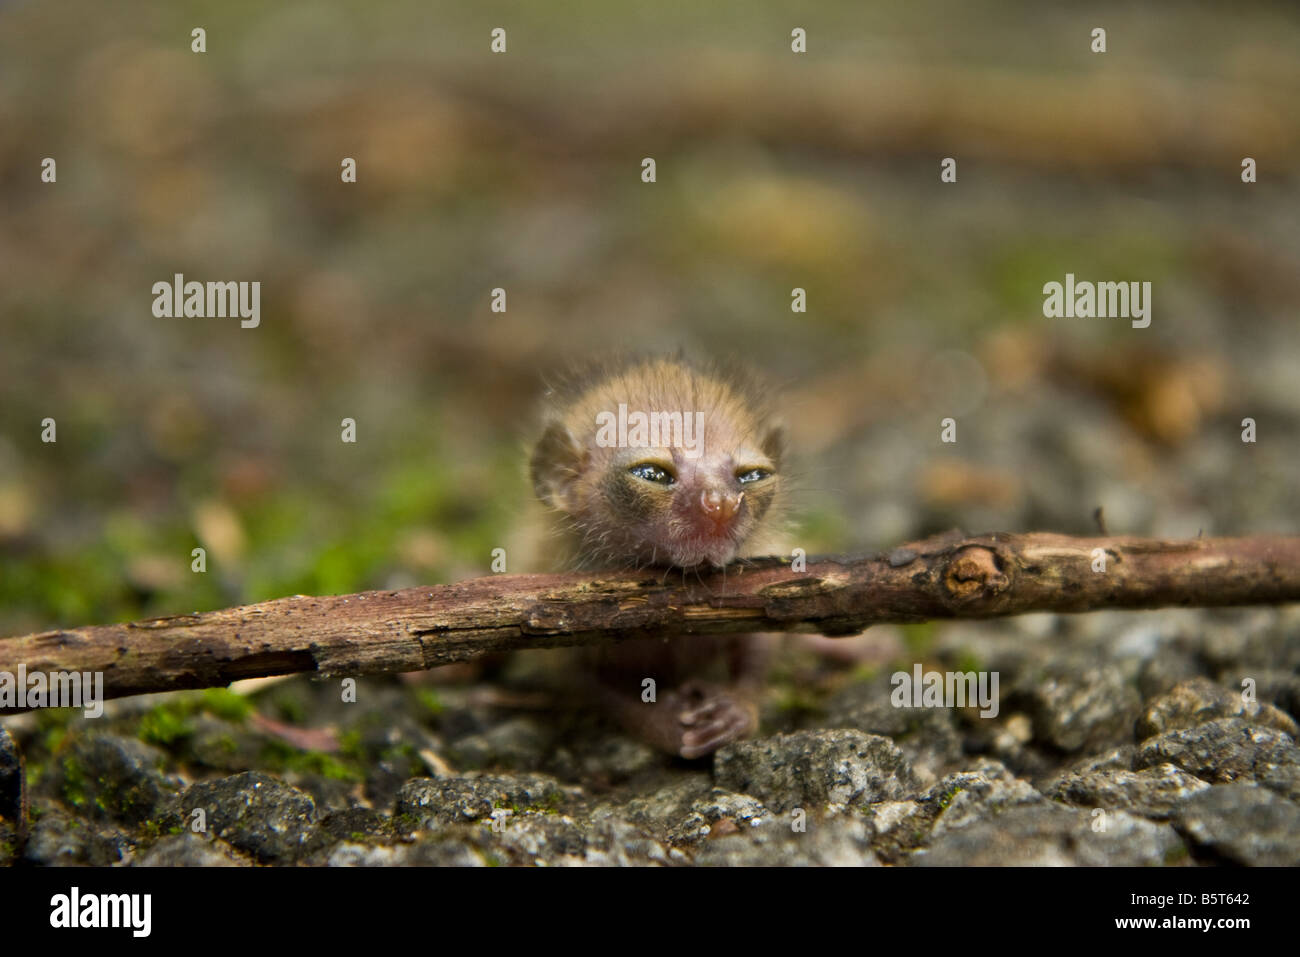 What is believed to be an infant Galago or bushbaby fallen to the ground in Togo, West Africa. Stock Photo